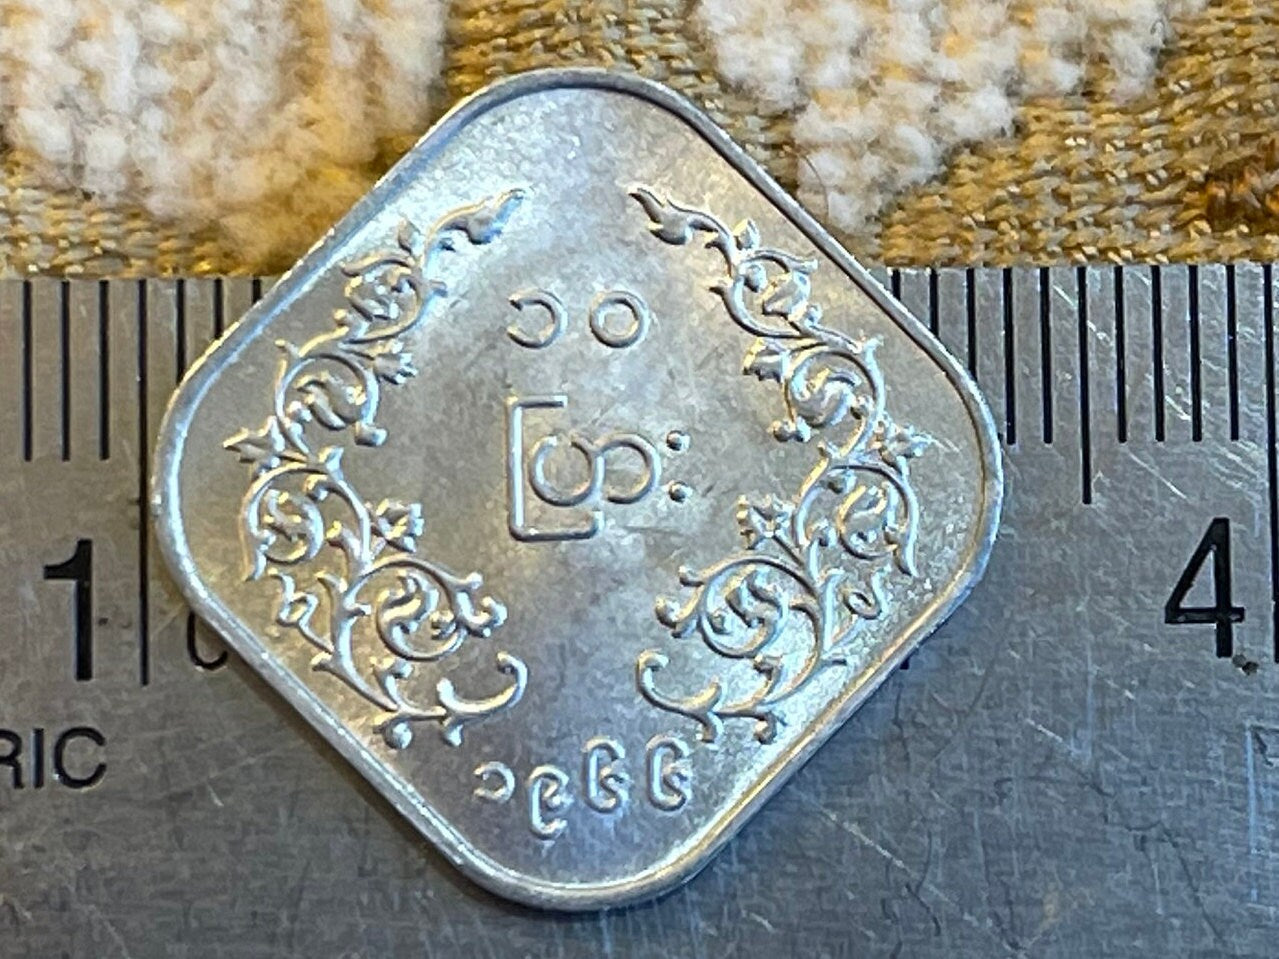 Aung San 10 Pyas Myanmar Authentic Coin Money for Jewelry and Craft Making (Freedom Fighter) (Revolutionary) (Square Coin)